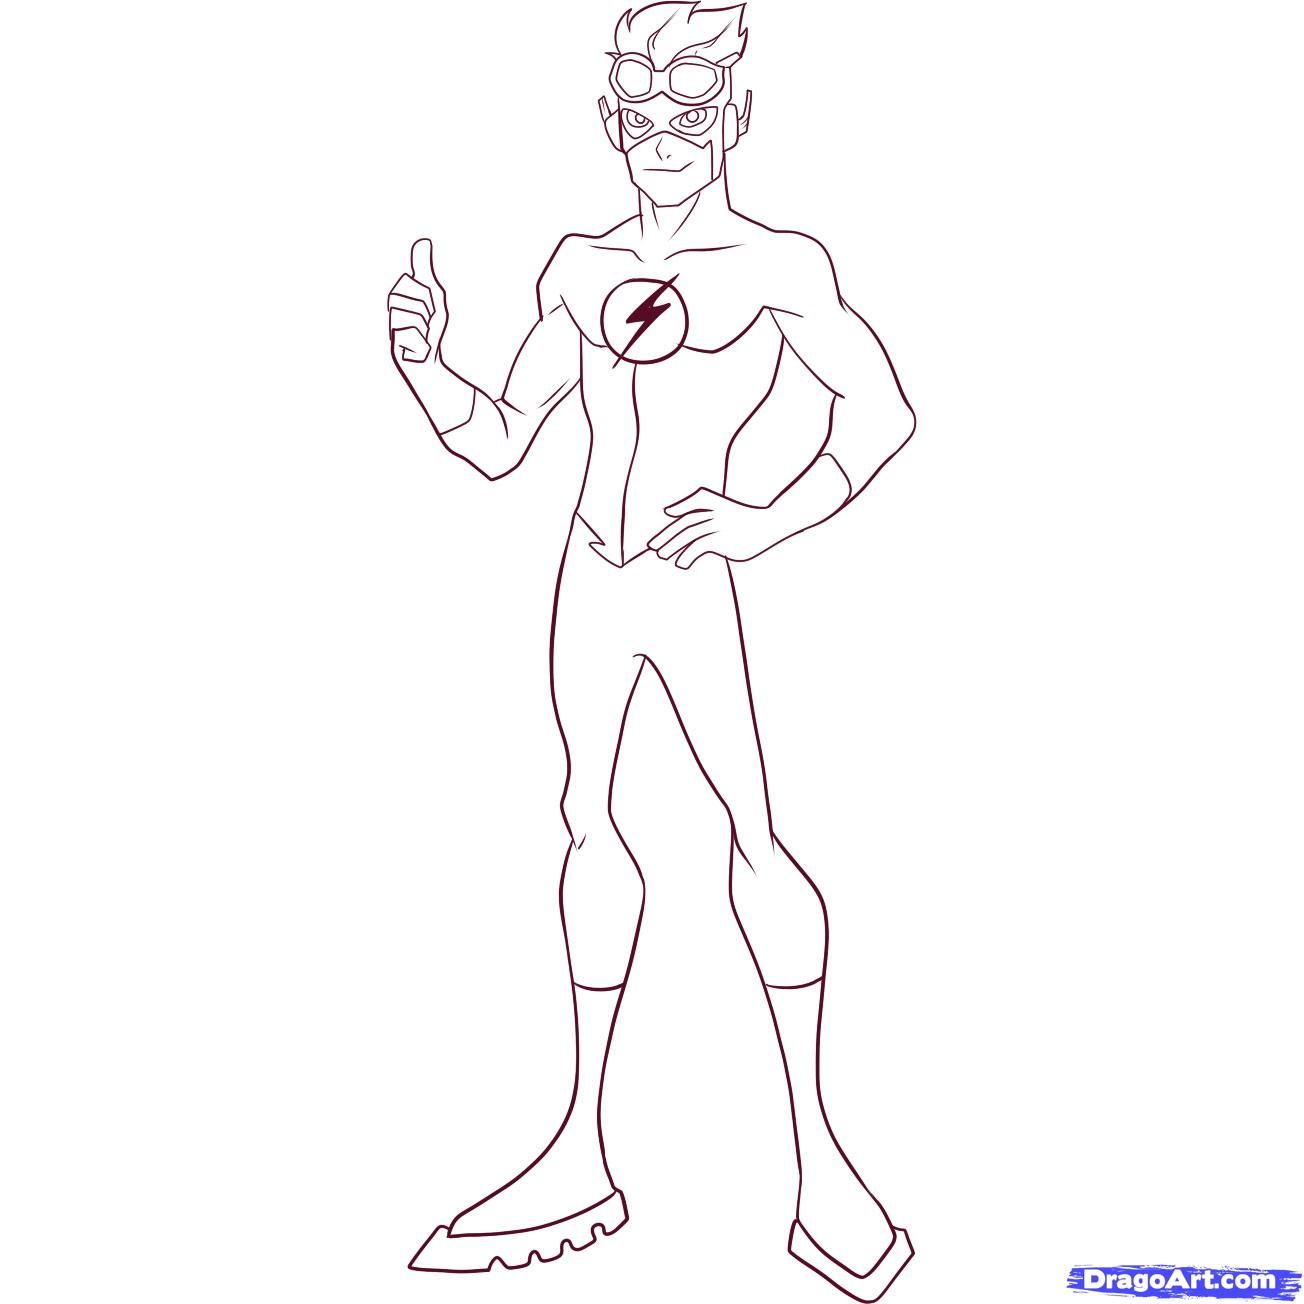 Flash Colouring Pictures - Coloring Pages for Kids and for Adults